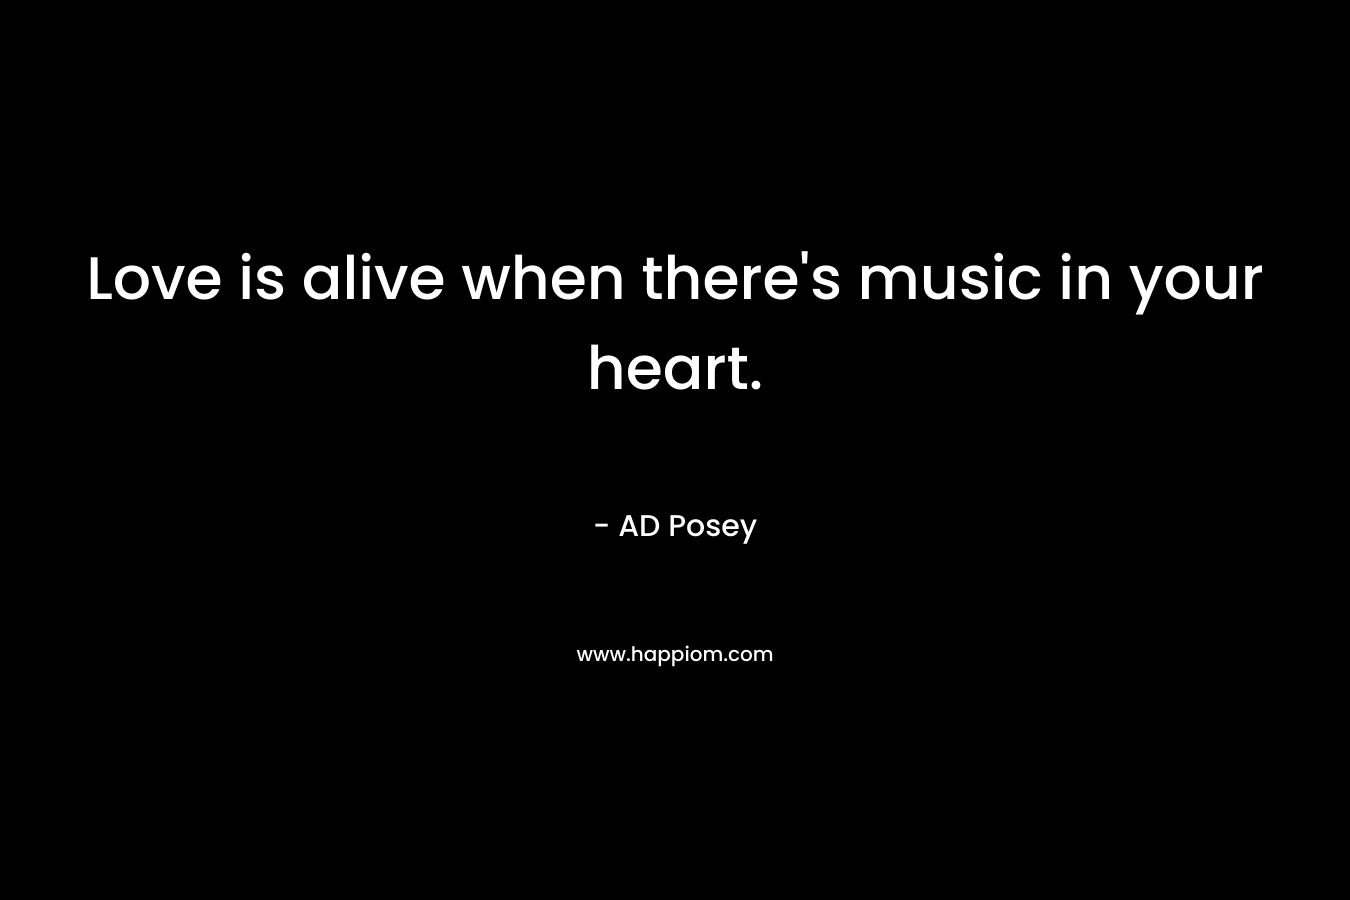 Love is alive when there's music in your heart.